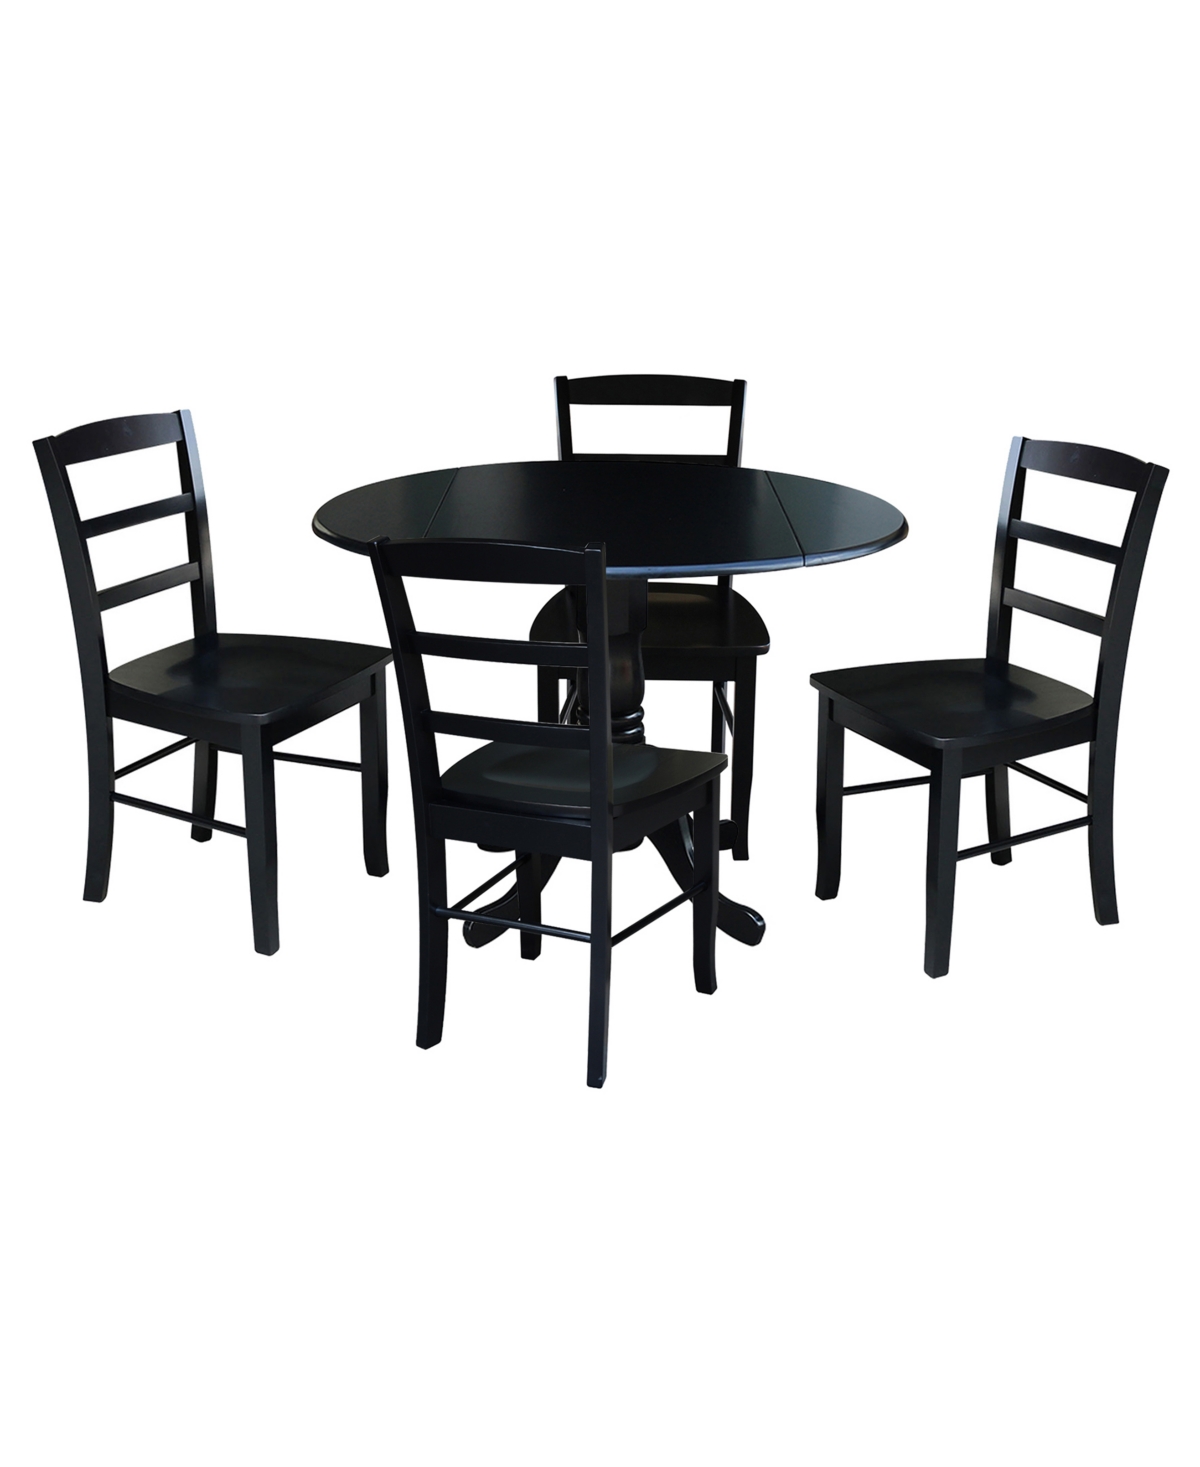 International Concepts 42" Dual Drop Leaf Table With 4 Ladder Back Dining Chairs In Black